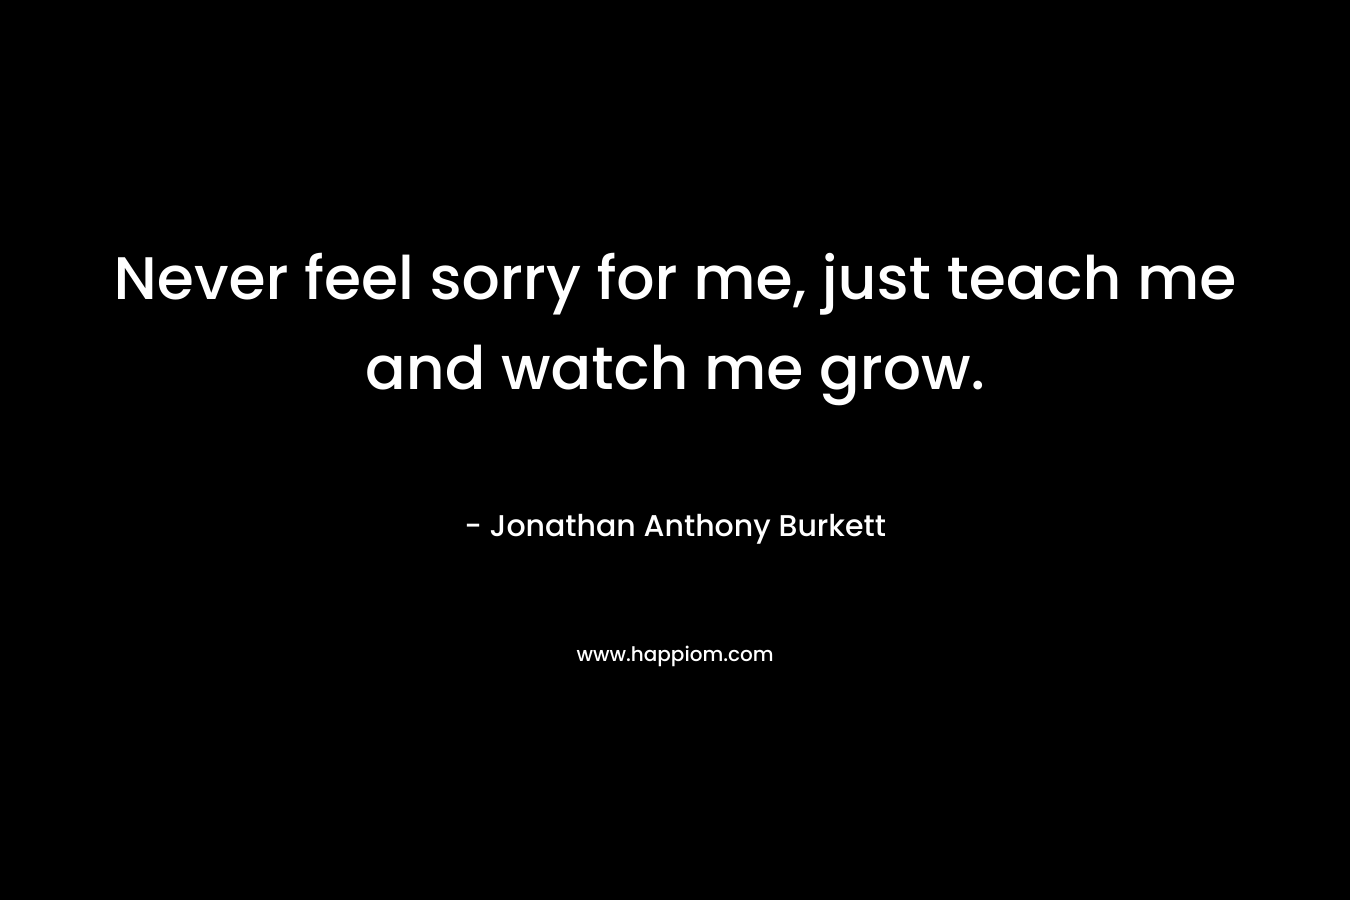 Never feel sorry for me, just teach me and watch me grow.